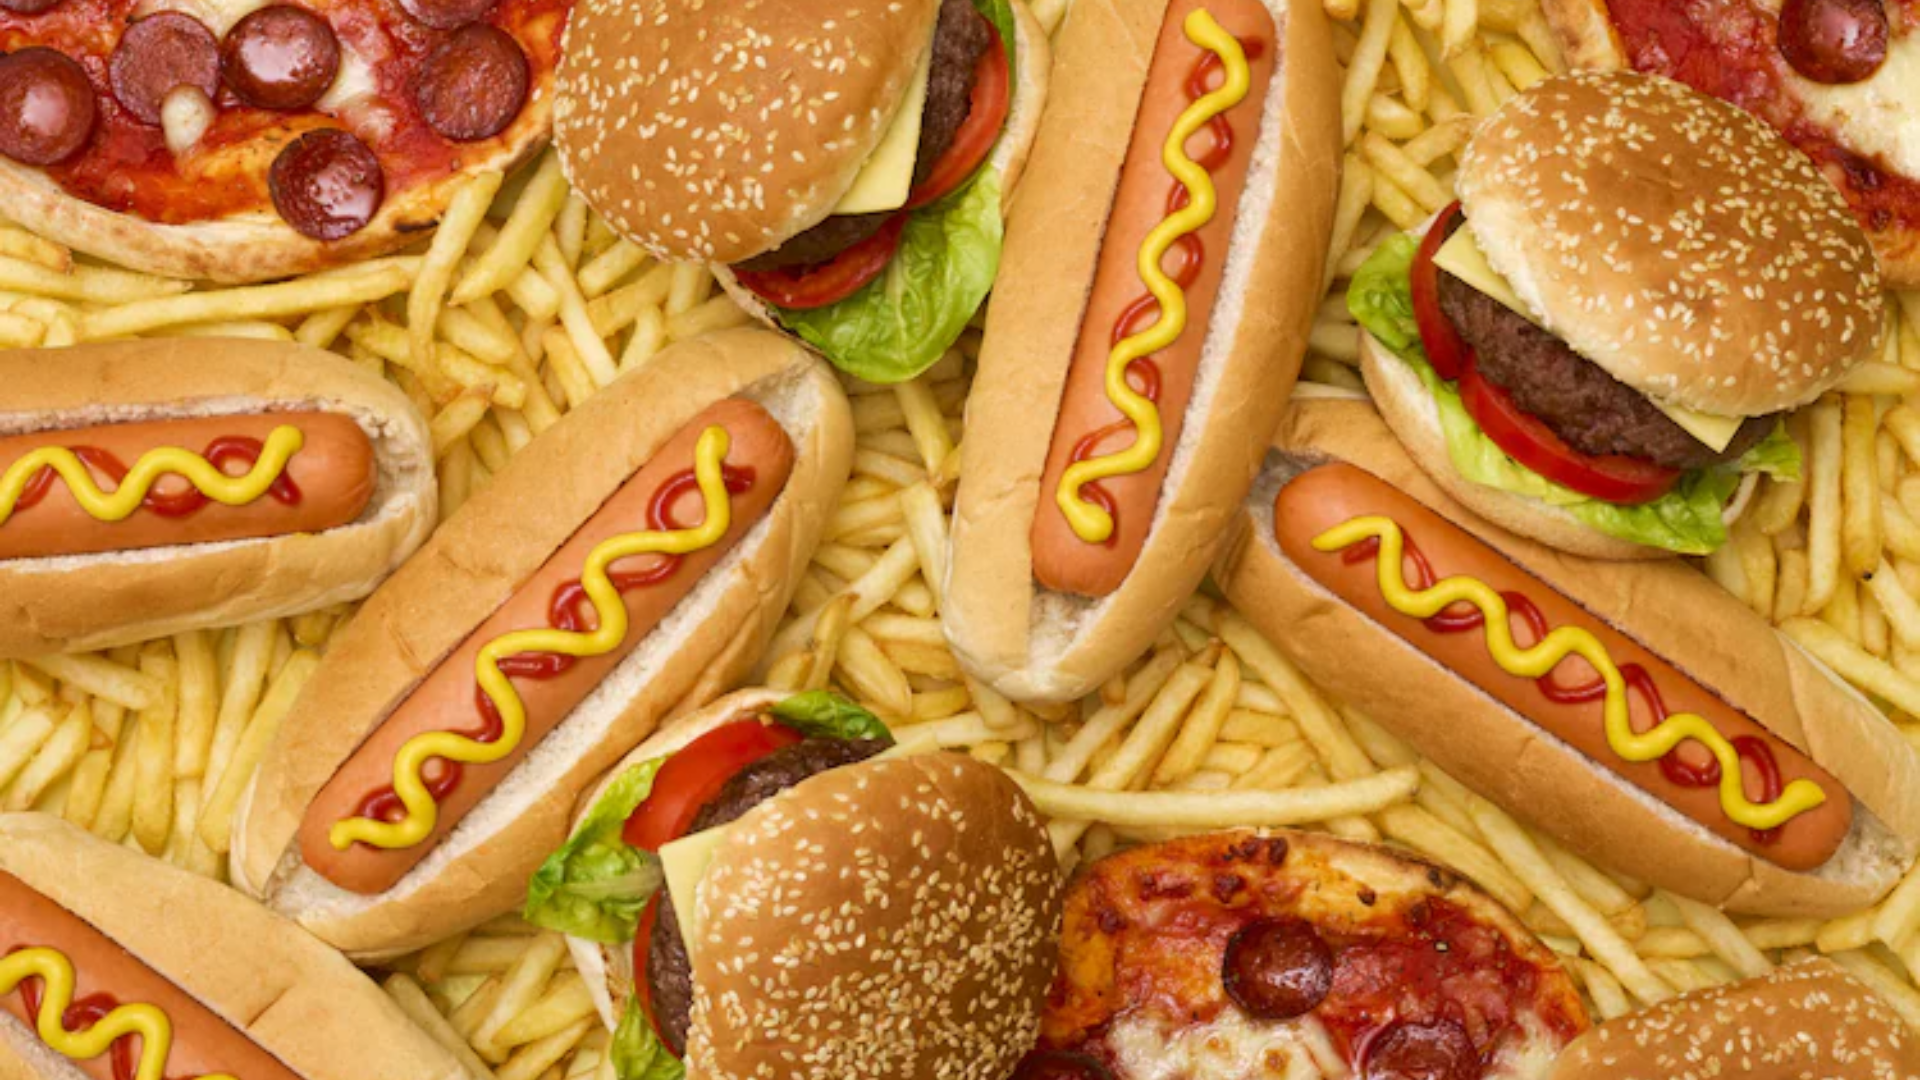 Harvard Study Says High Consumption of Ultra-Processed Foods Can Lead to Increased Mortality Risks